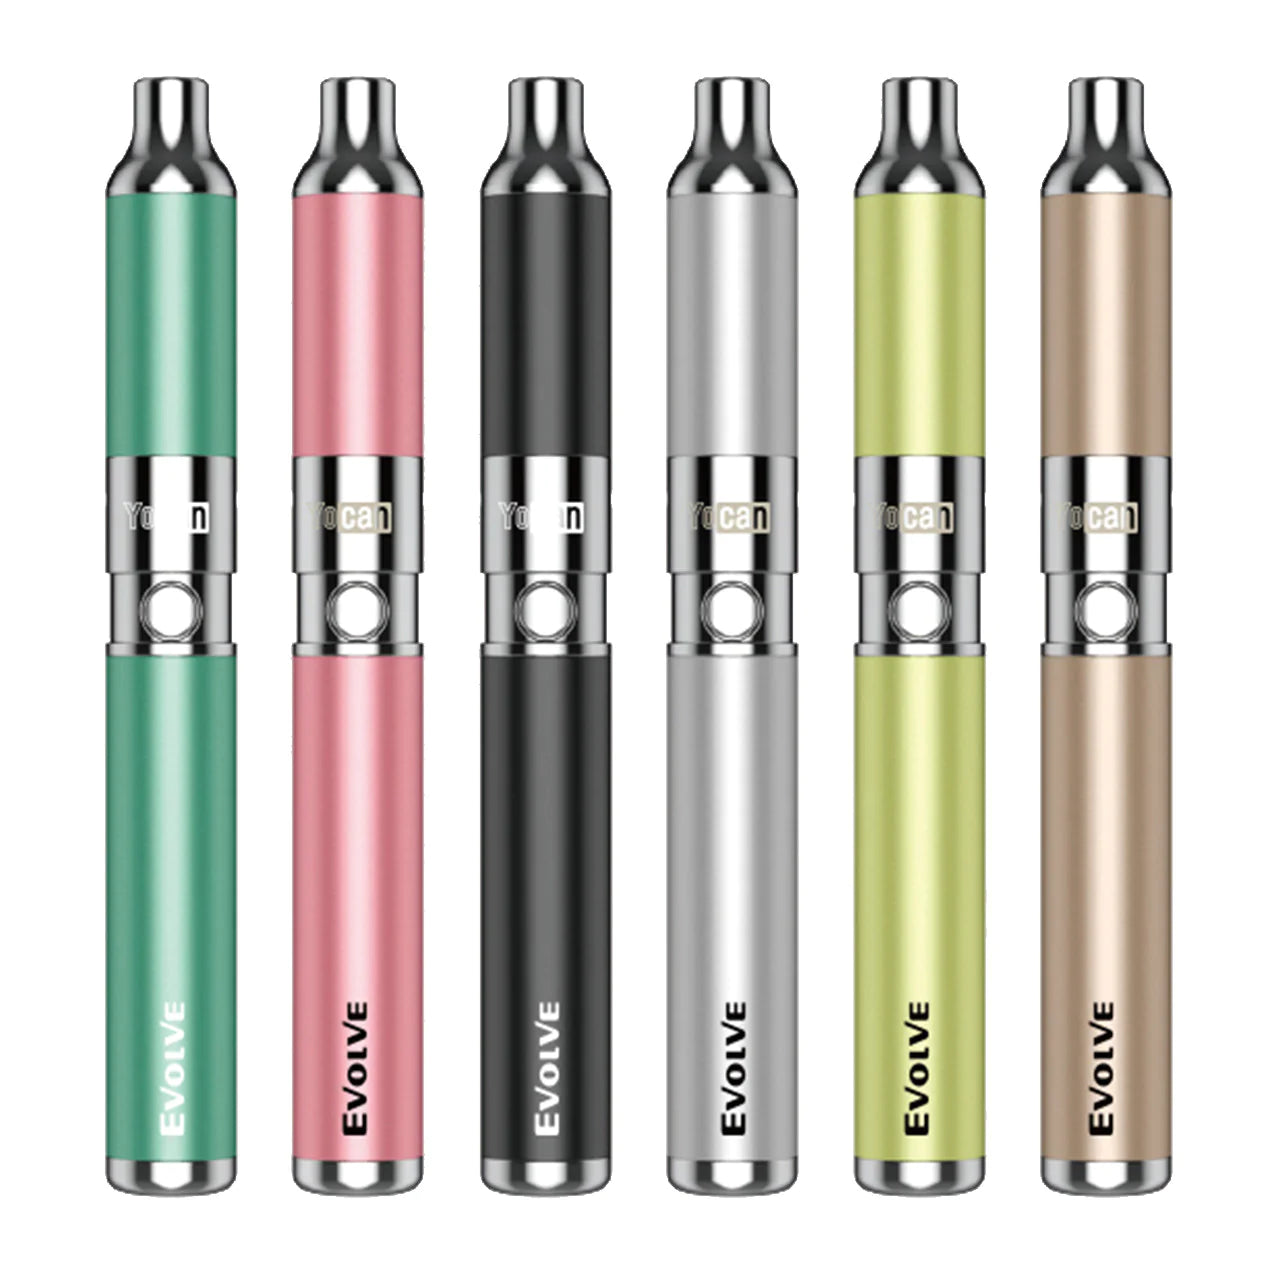 Yocan - The Kings of 510 Batteries